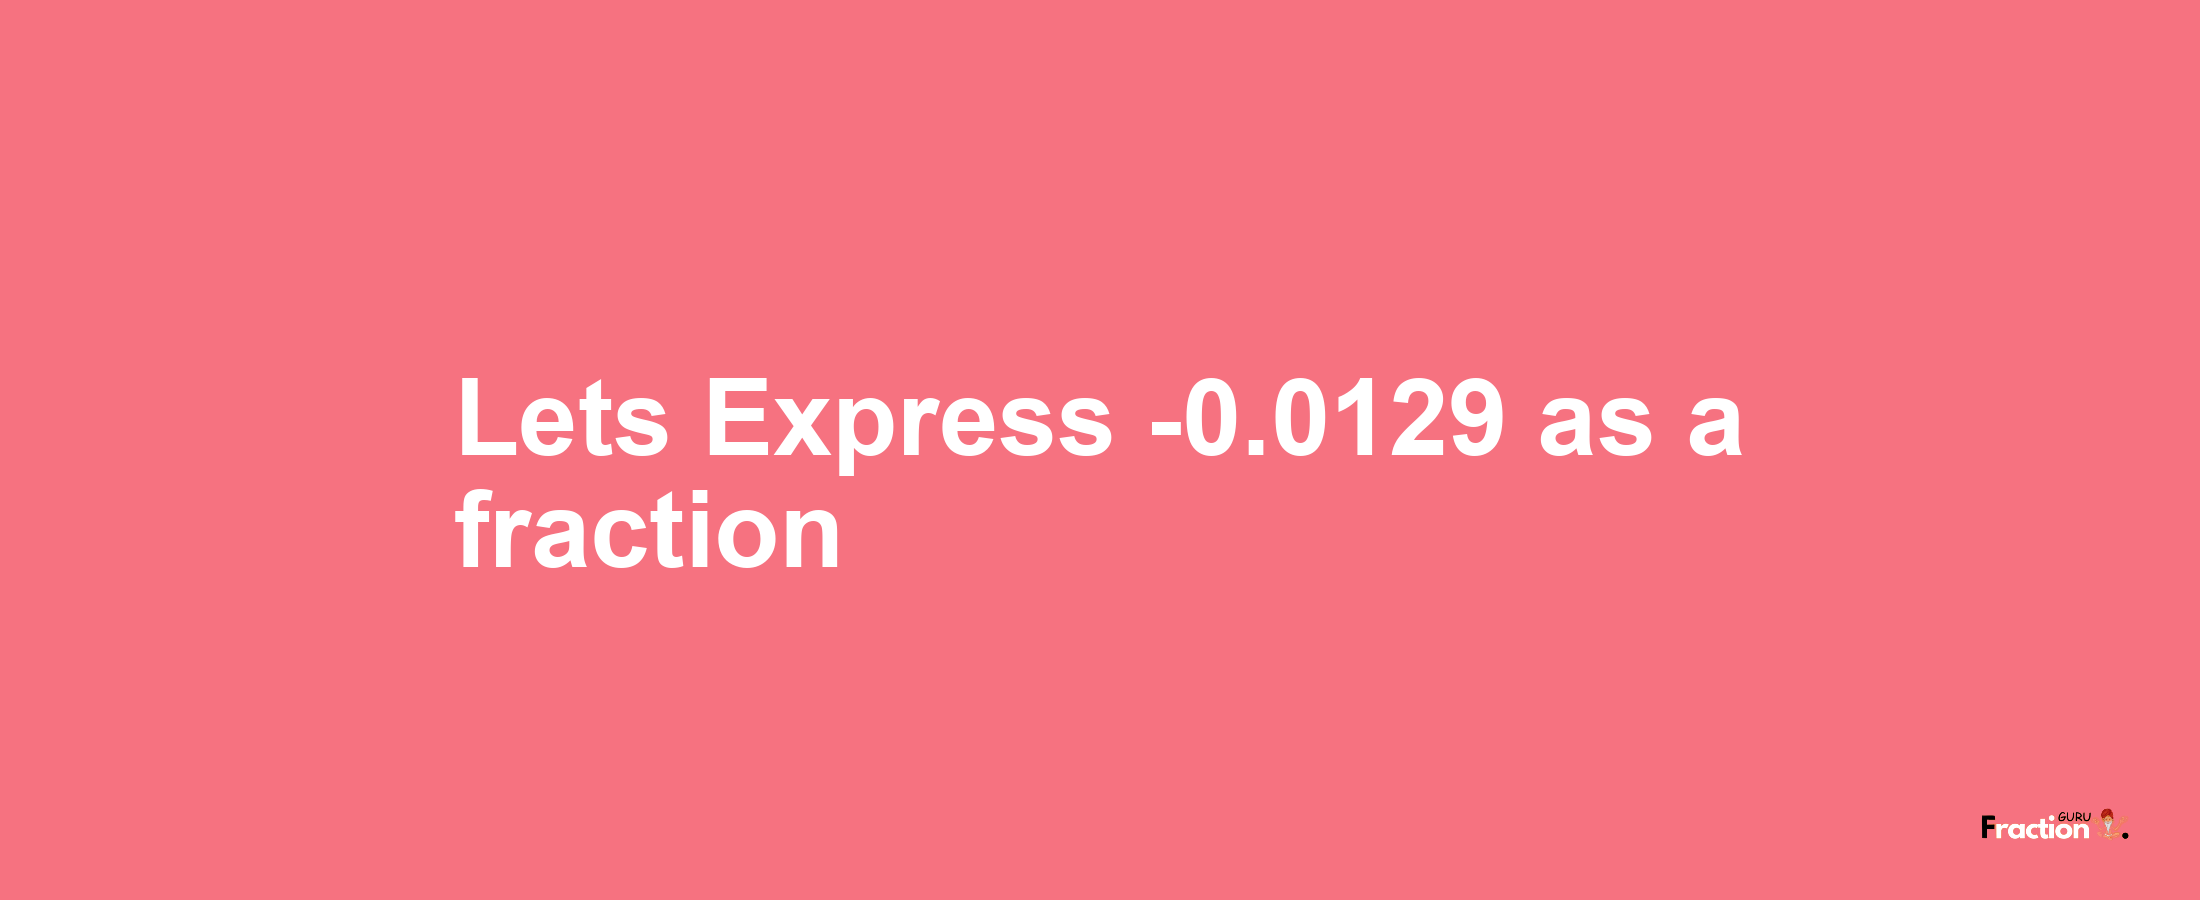 Lets Express -0.0129 as afraction